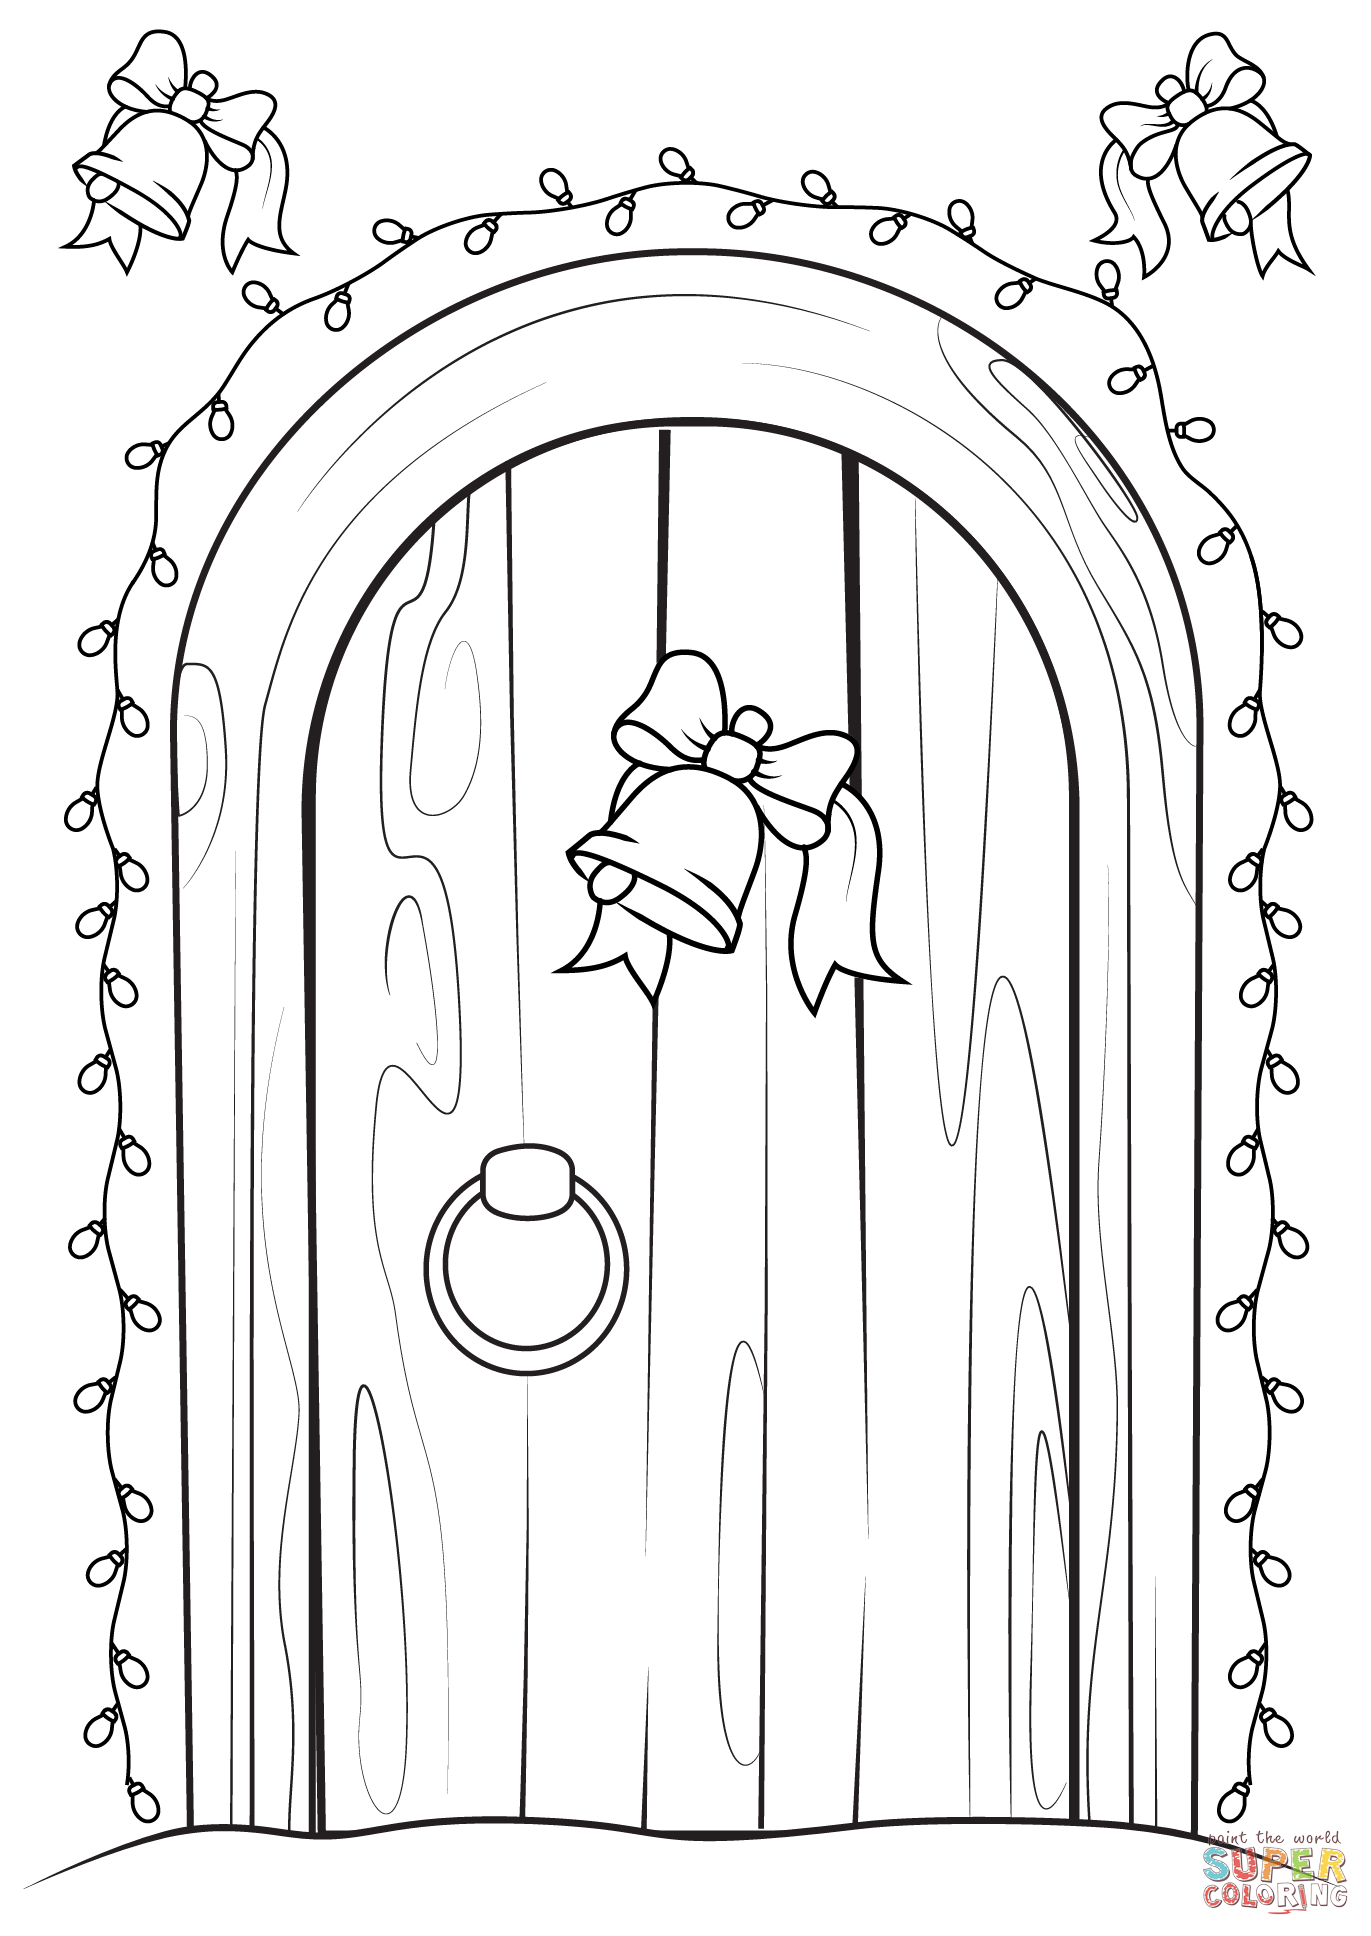 Christmas house door coloring page free printable coloring pages